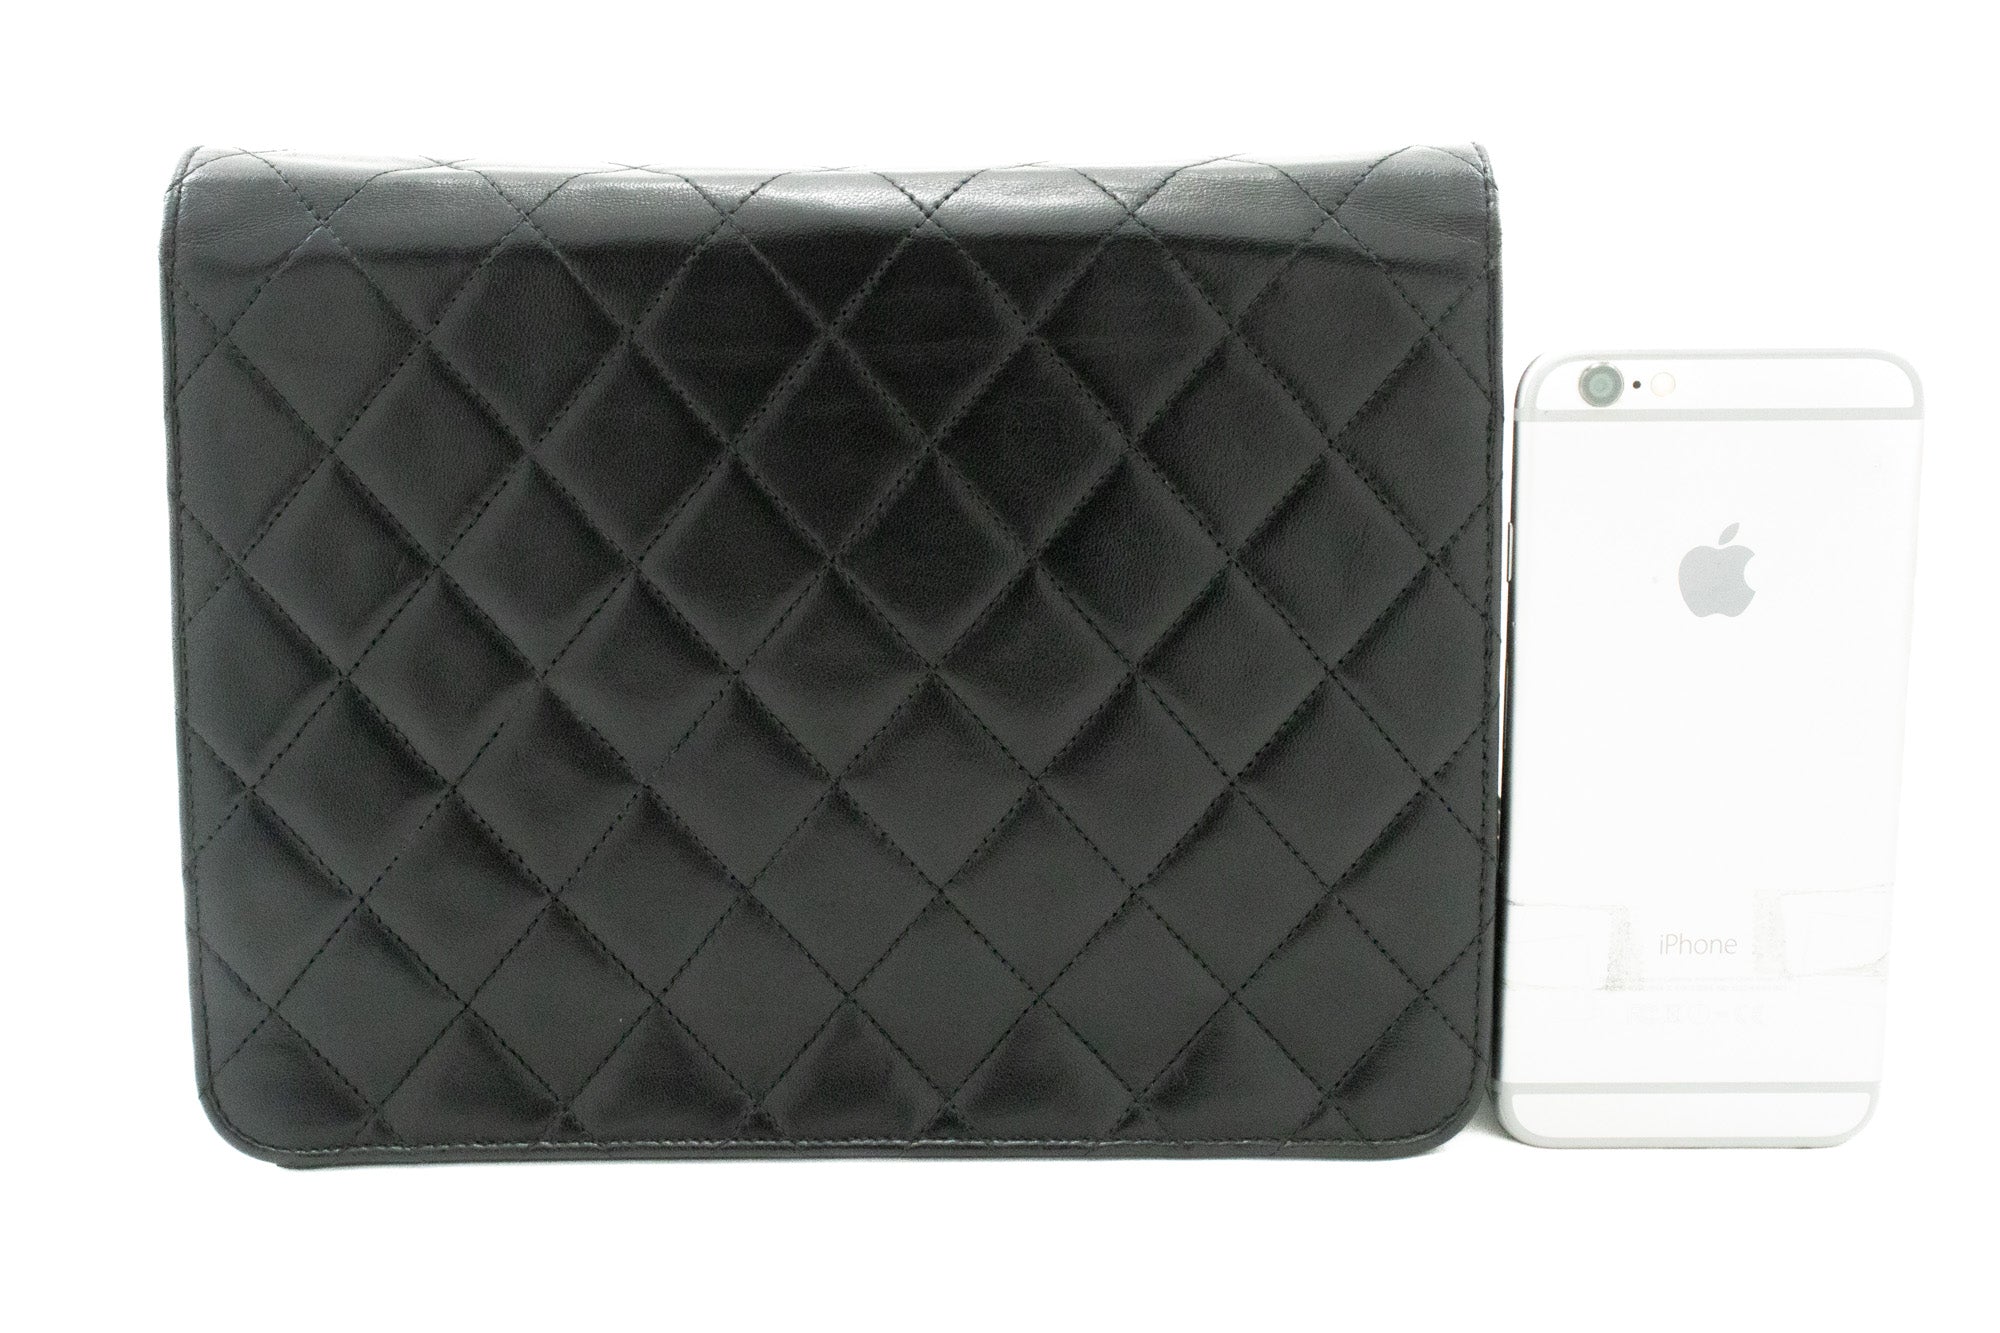 Chanel Small Chain Shoulder Bag Clutch